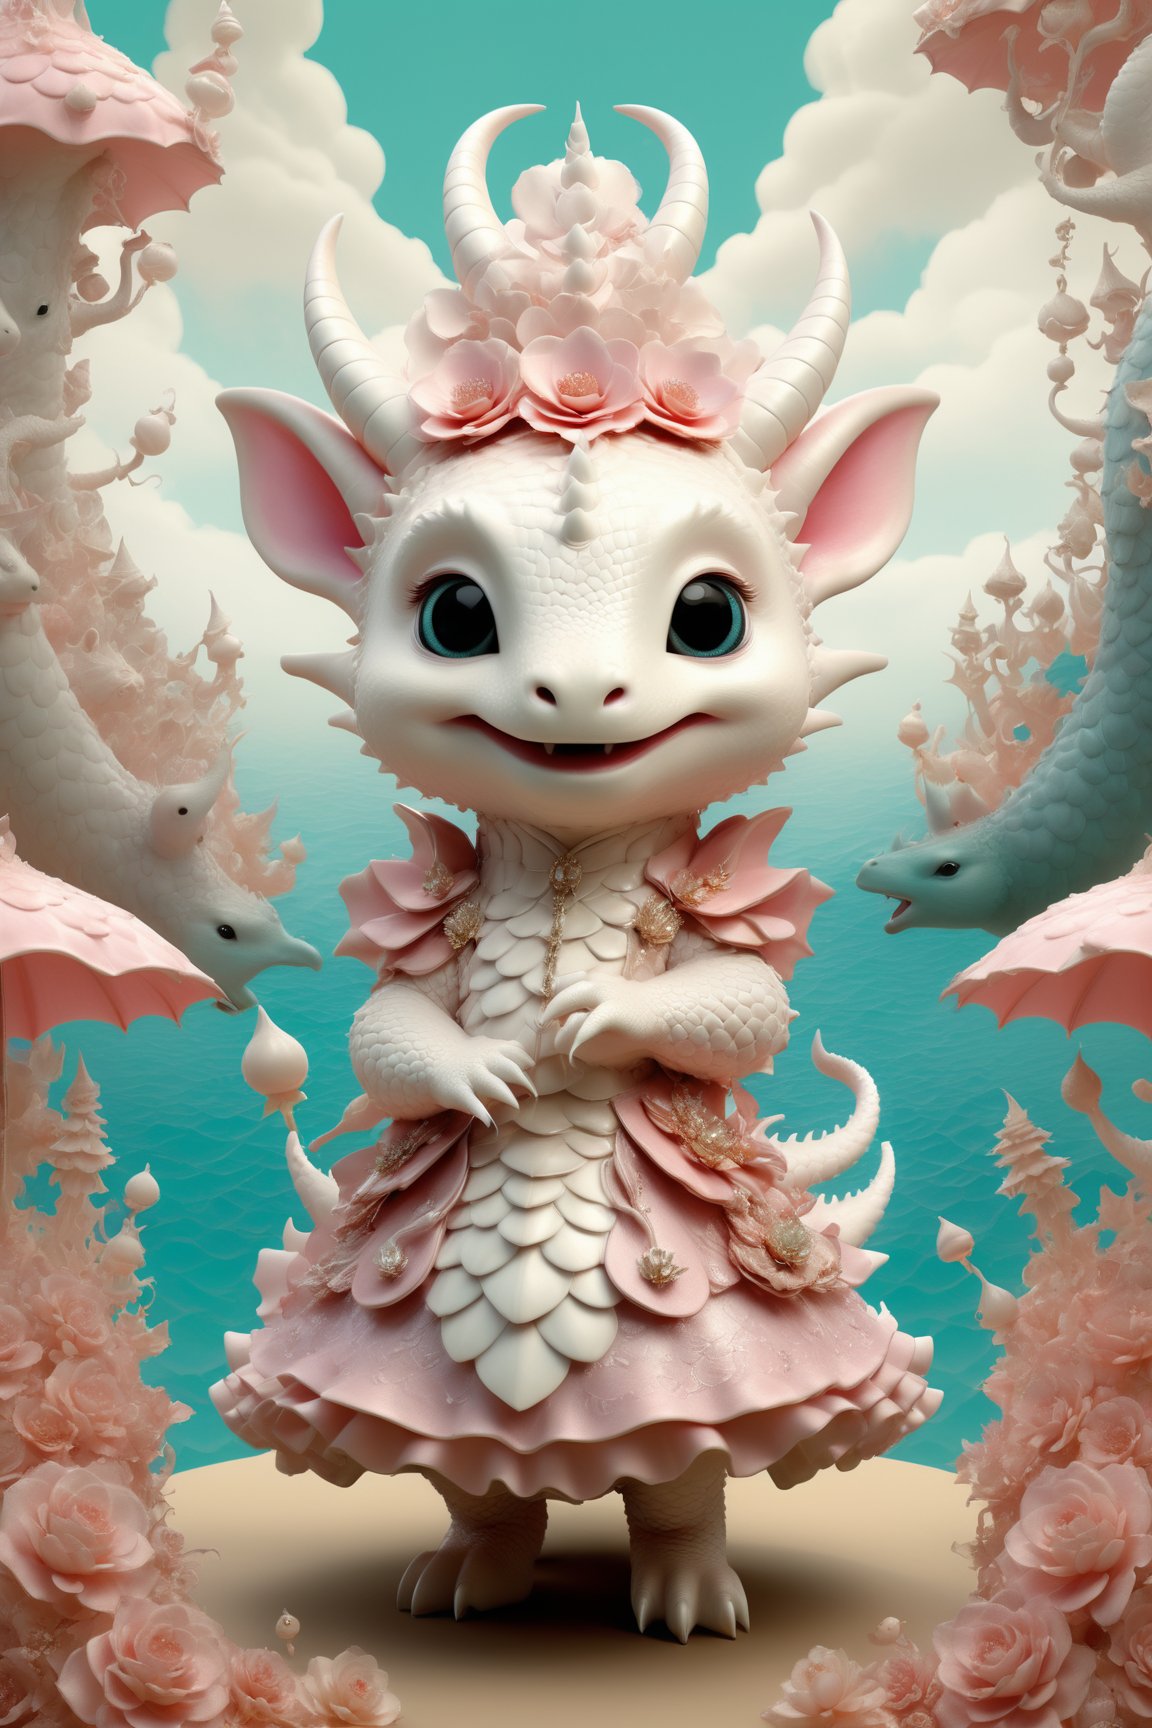 A beautiful and whimsical elusive pop noir surrealism, art of Dressed animals - cute dragon,dancing,singing,(happy),, in the style of Dr. Seuss, inspired by Mandelbrot fractals and the Doppler effect glitchcore, in the style of Ray Caesar, modern art, art nouveau, realism fantastic, intricate details, surreal emotion art, interesting emotional feeling, highli texture details, Behance winning award. rendered in a charming, ornate style, with textured brushstrokes and incredibly high 12k resolution. This highly detailed 3DHD oil painting showcases Pierre-Auguste Renoir's mastery of color and technique. The deep, incandescent tones and ultra-fine details evoke a surrealist vibe reminiscent of Craola, Nicoletta Ceccoli, Beeple, Jeremiah Ketner, Todd Lockwood. Meticulously hand-painted with meticulous attention to detail, this work of art captures the essence of fantastical scenes from a bygone era. Created using cutting-edge Octane Render technology, underwater,cute dragon